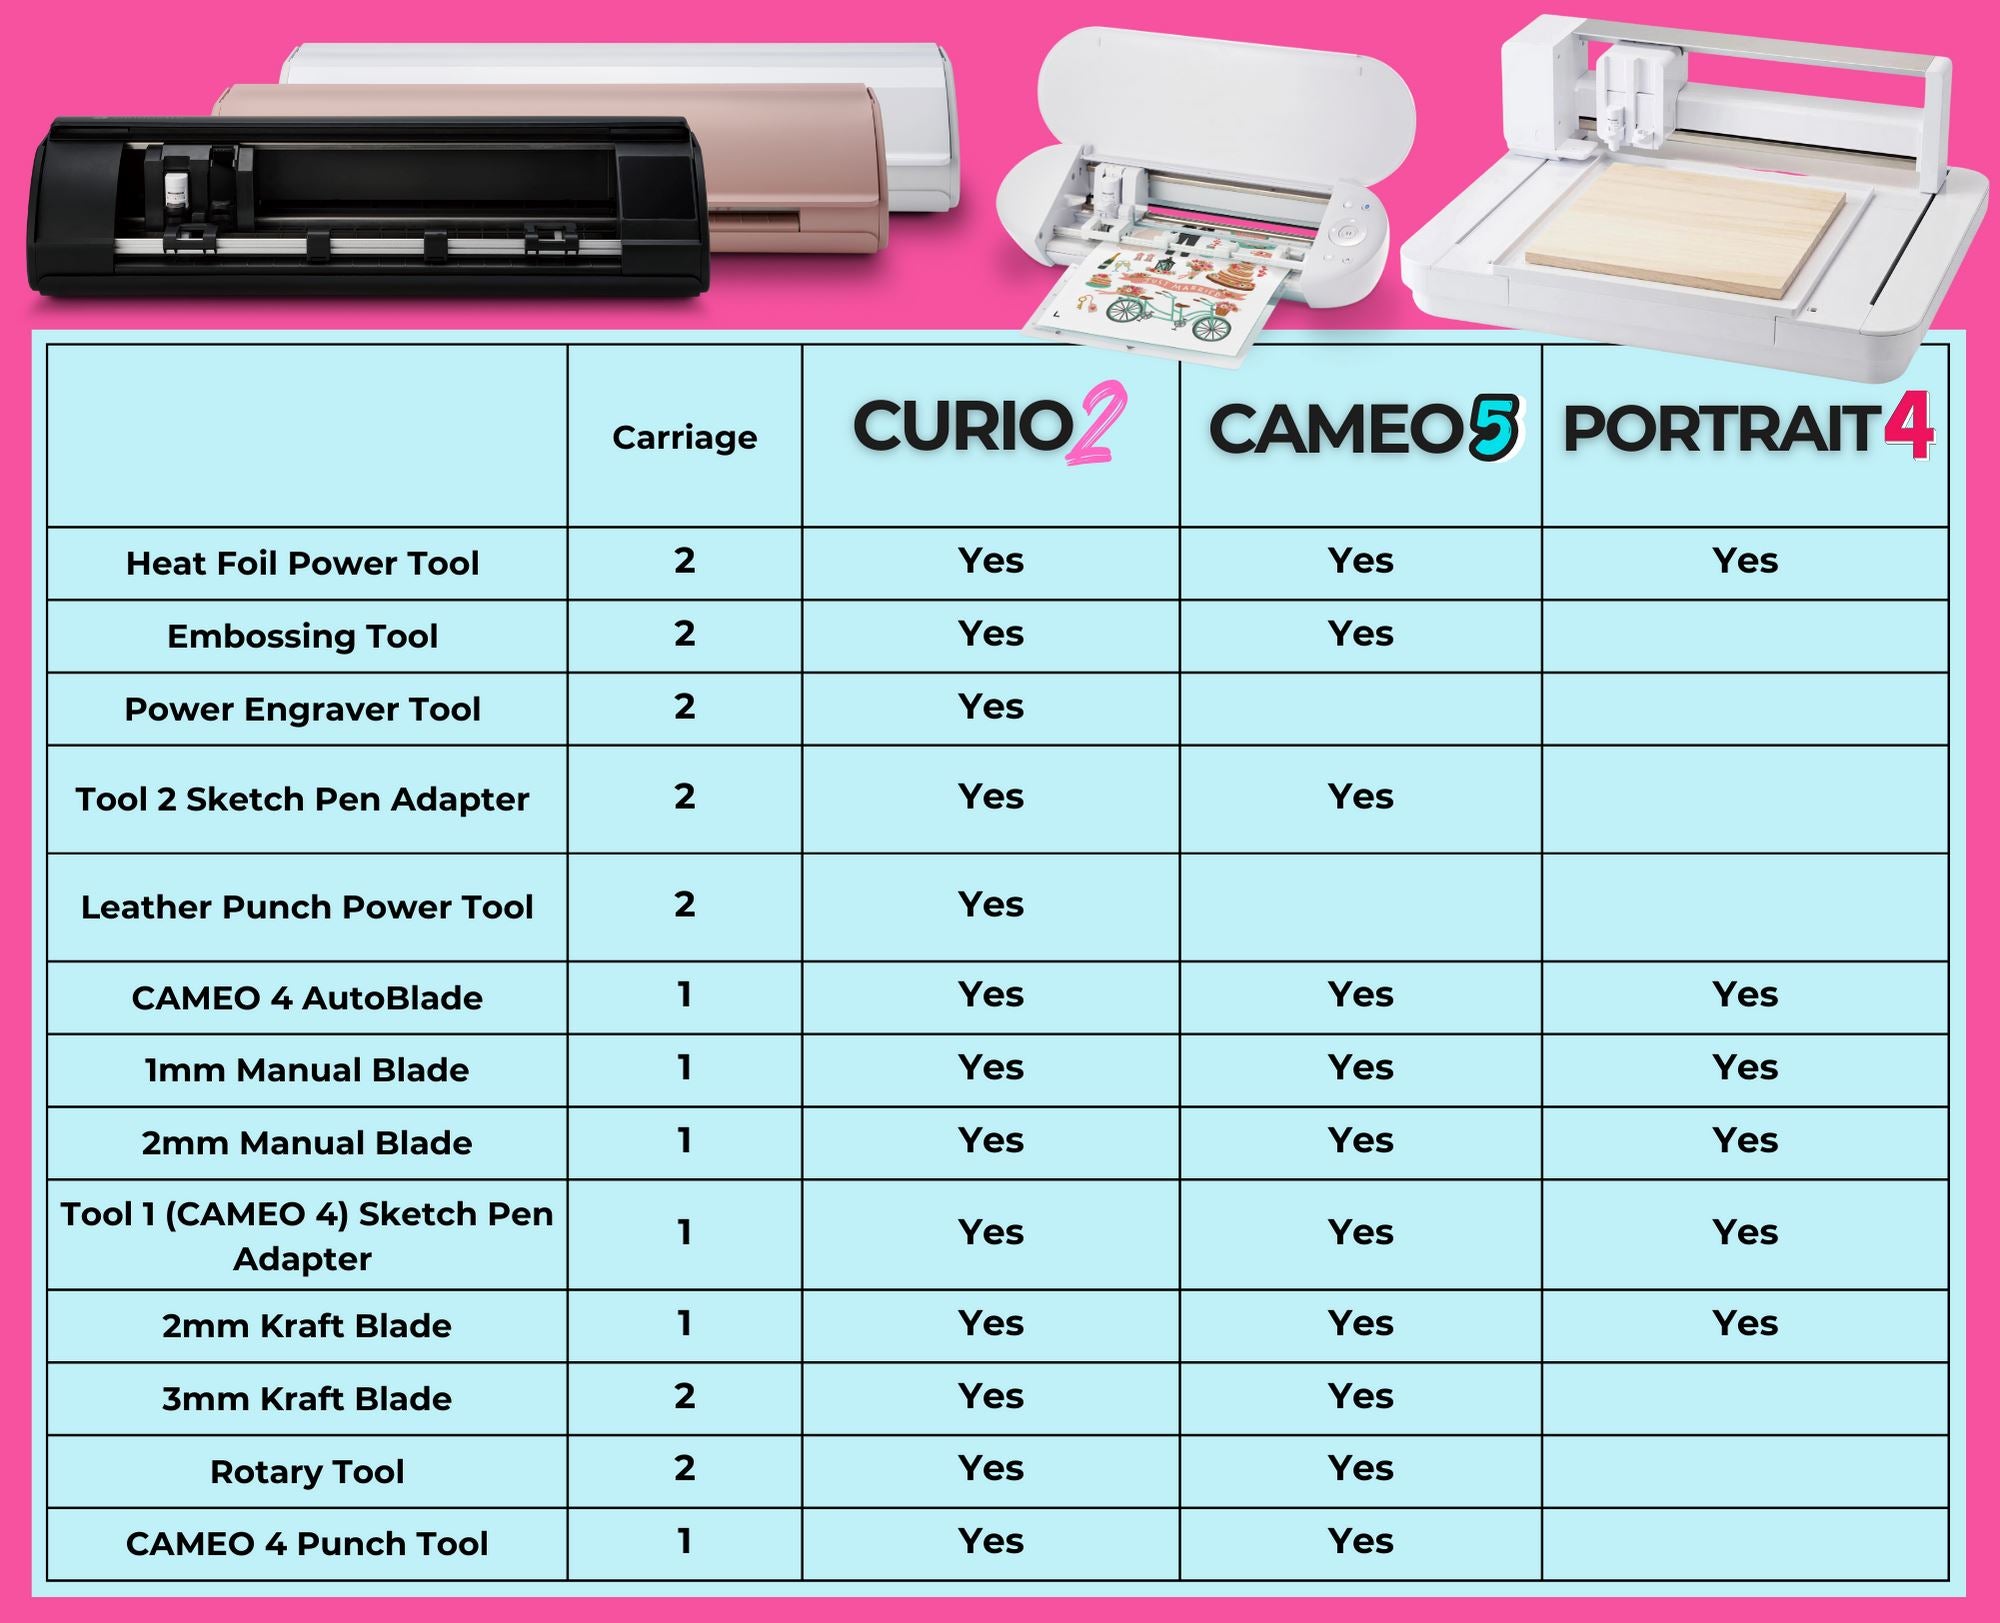 New Silhouette CAMEO 5 and 15 CAMEO 5 Plus: Everything to Know